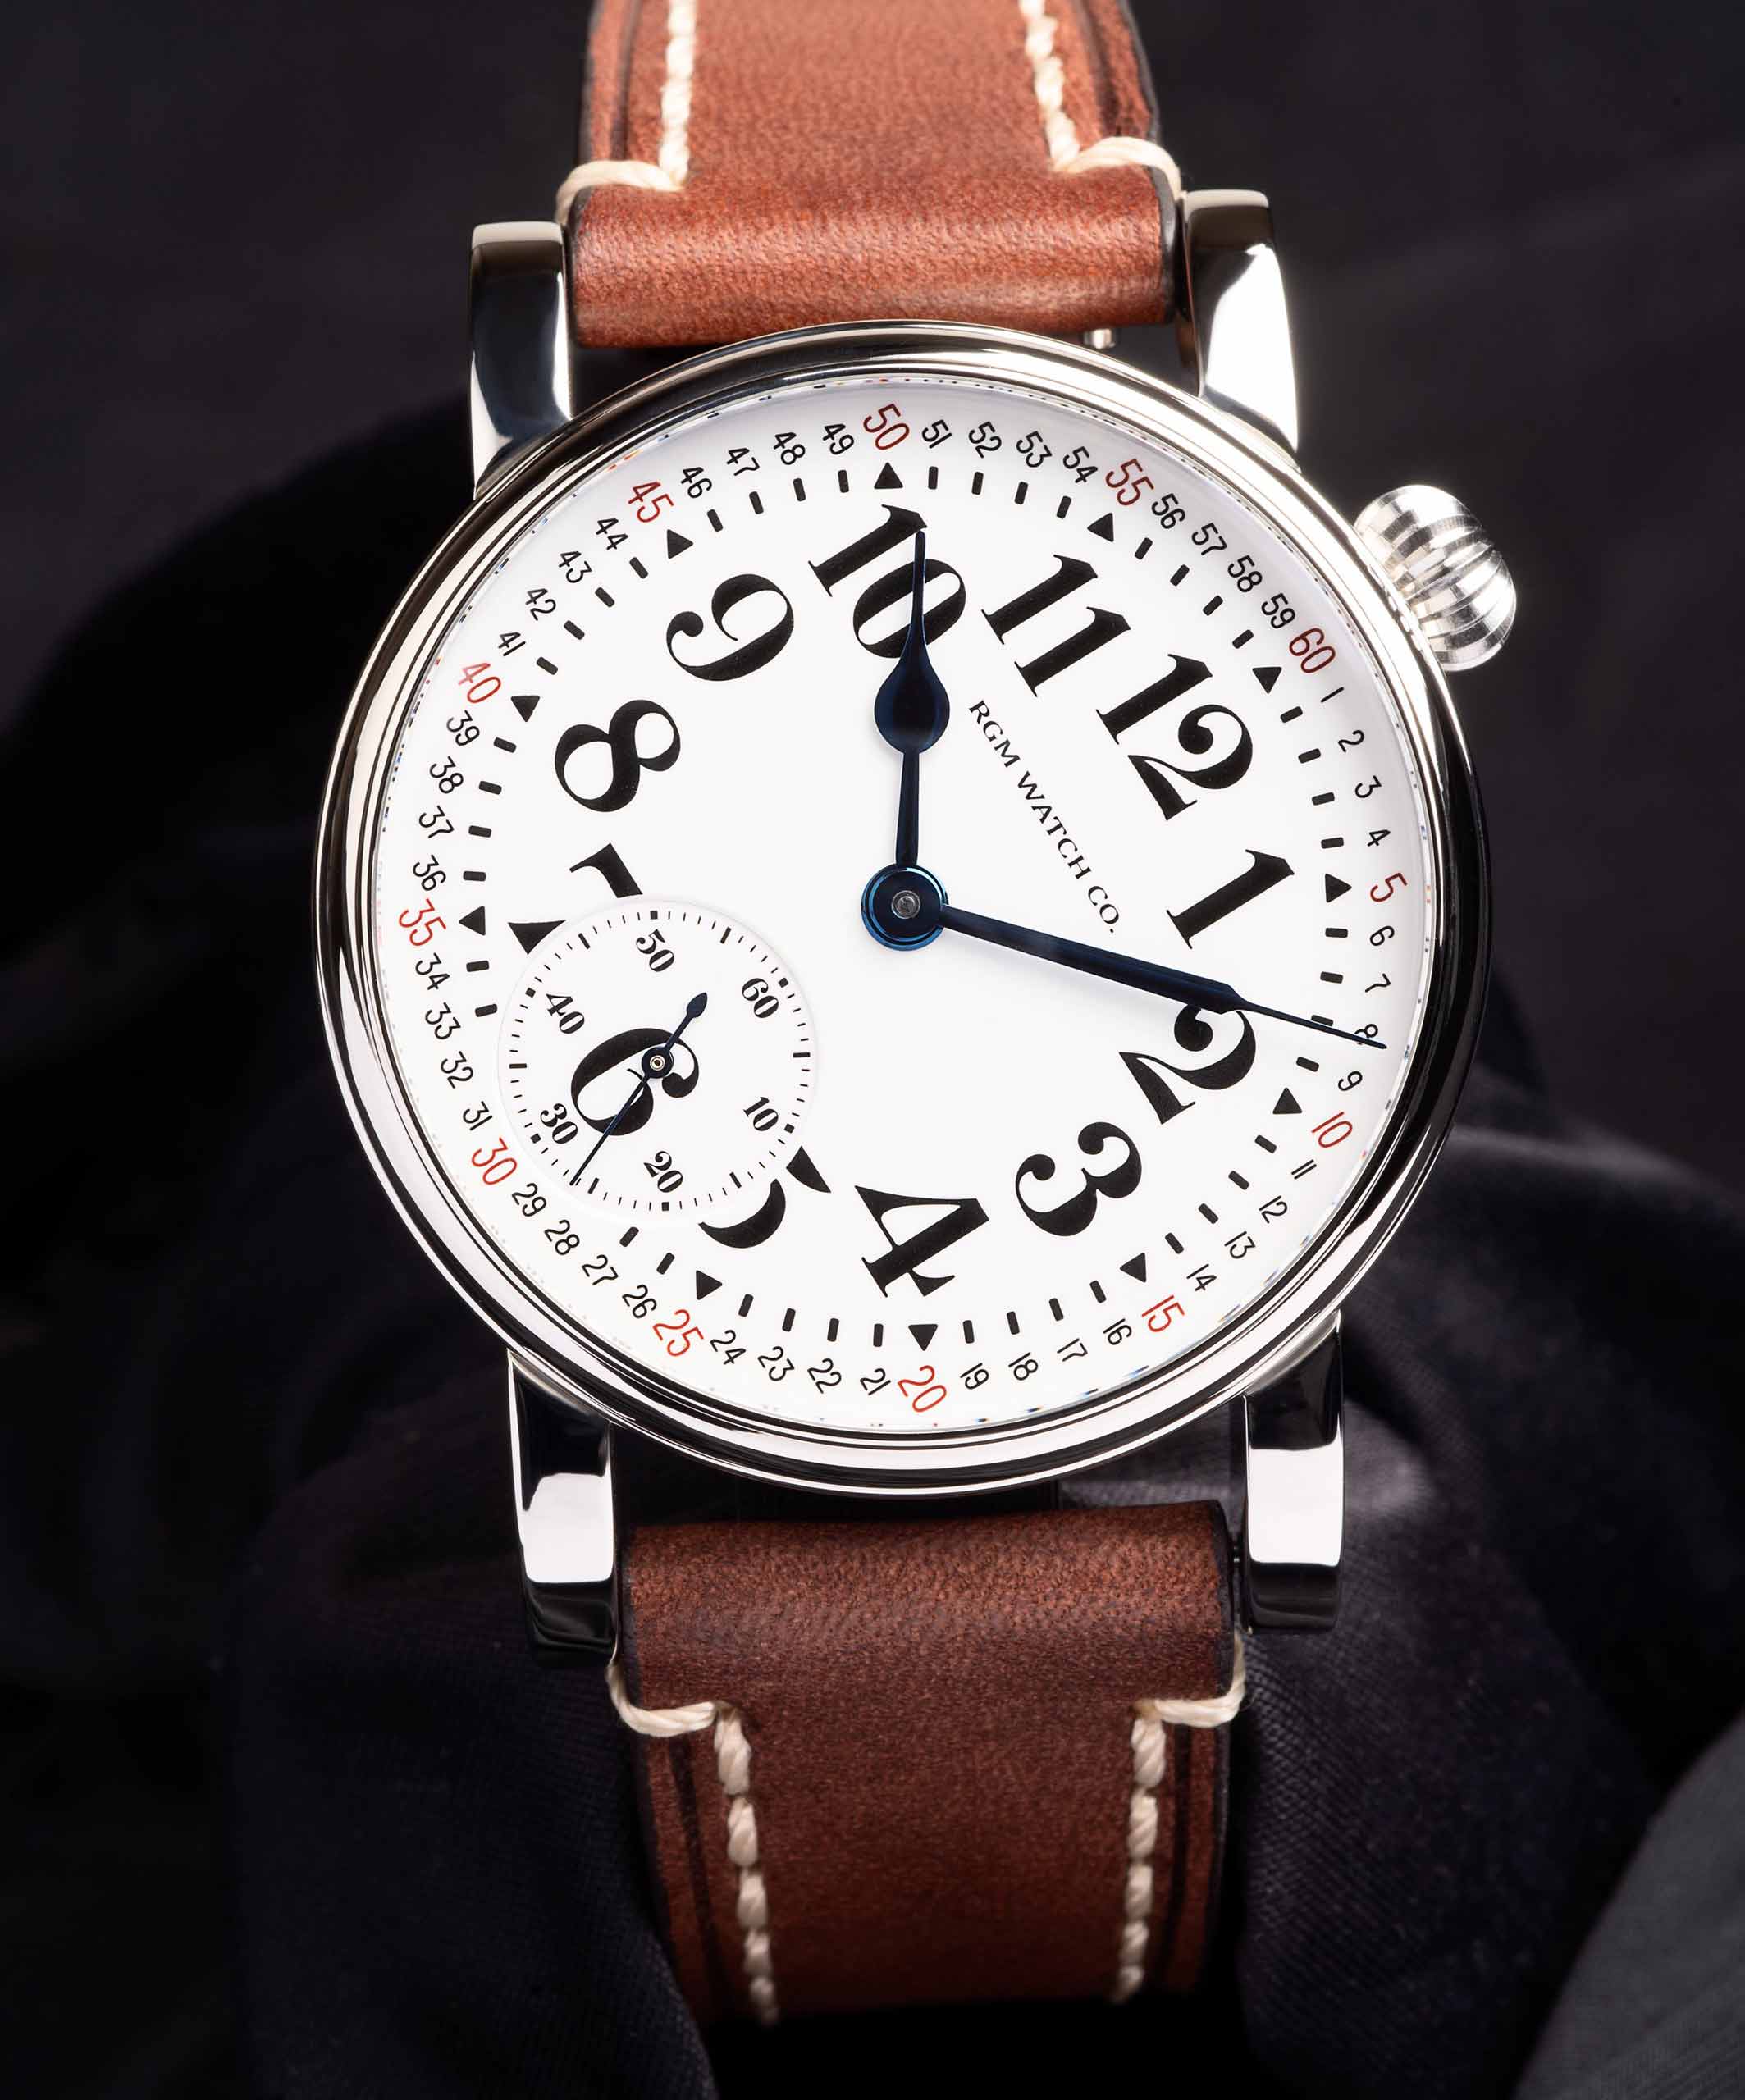 RGM Celebrates their 30th Anniversary with a New Dial for a Classic Railroad Watch